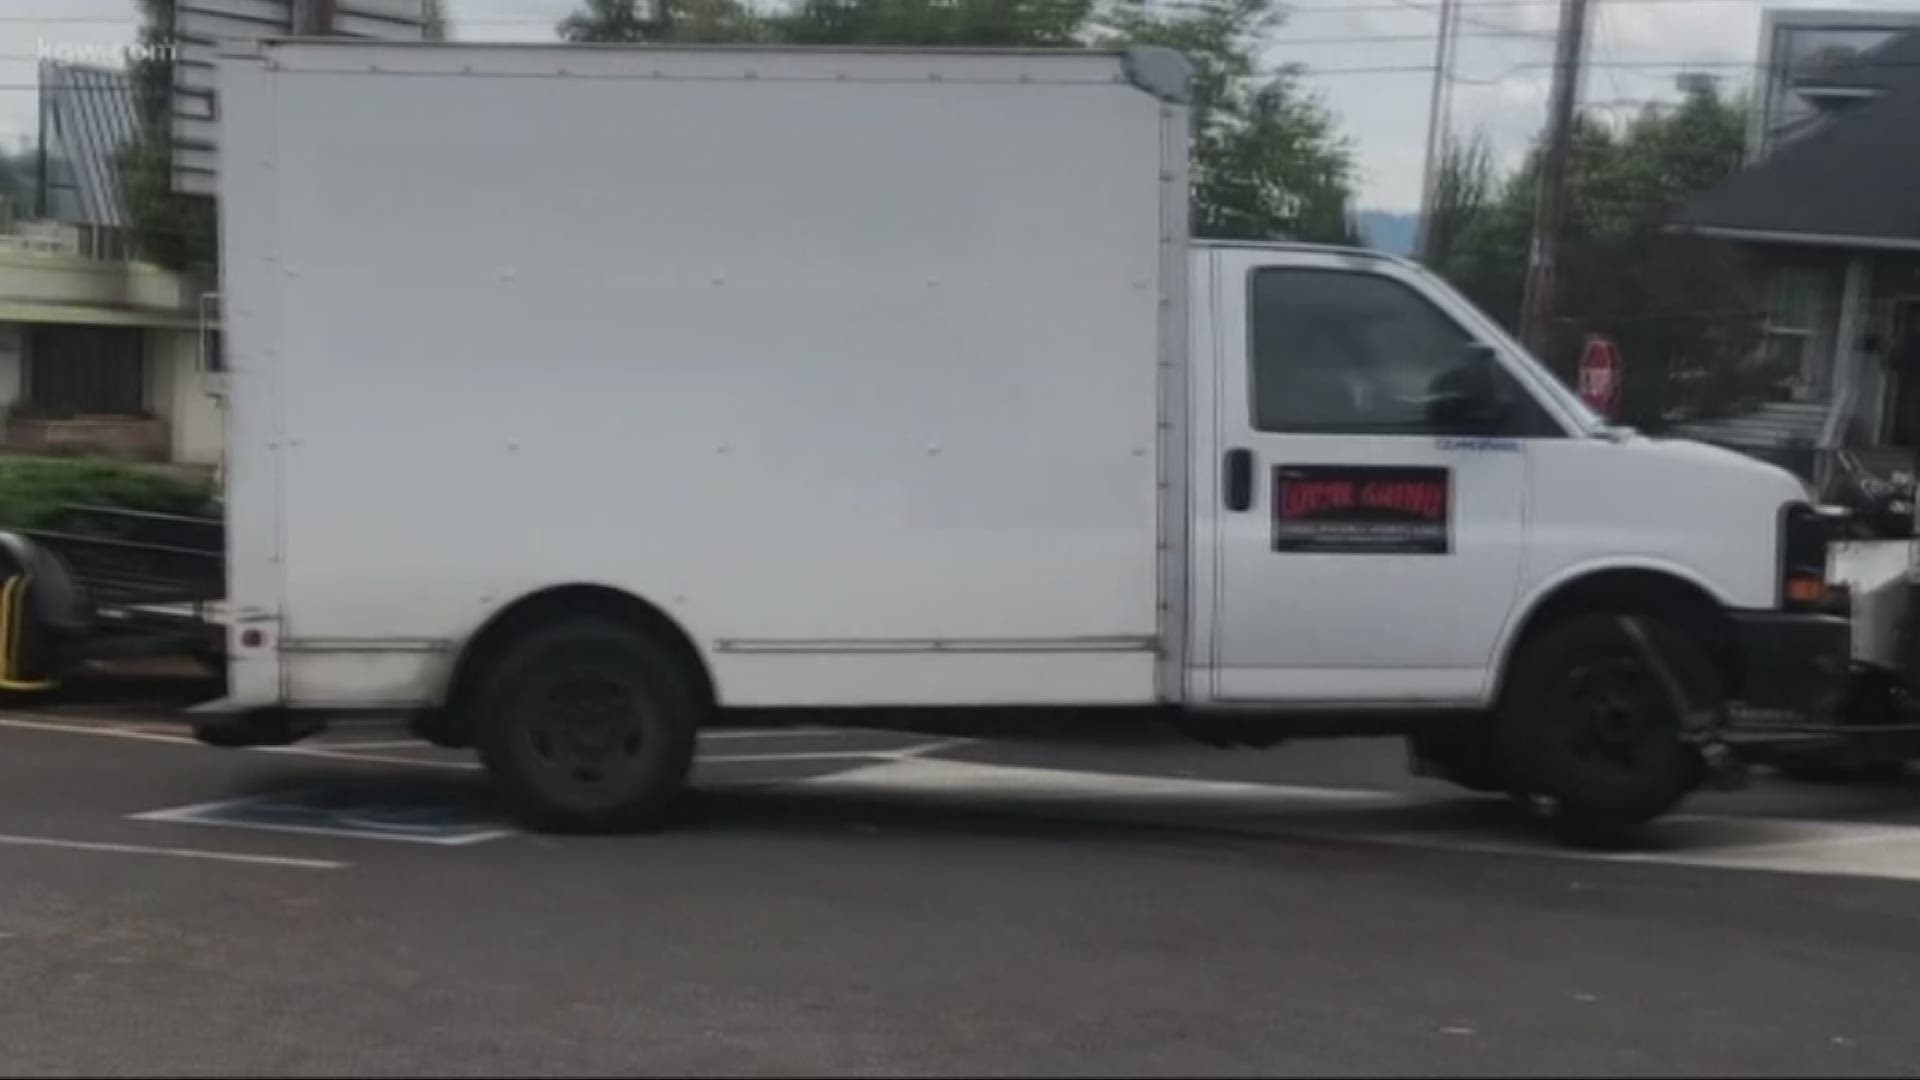 A truck owner found his stolen vehicle by accident.